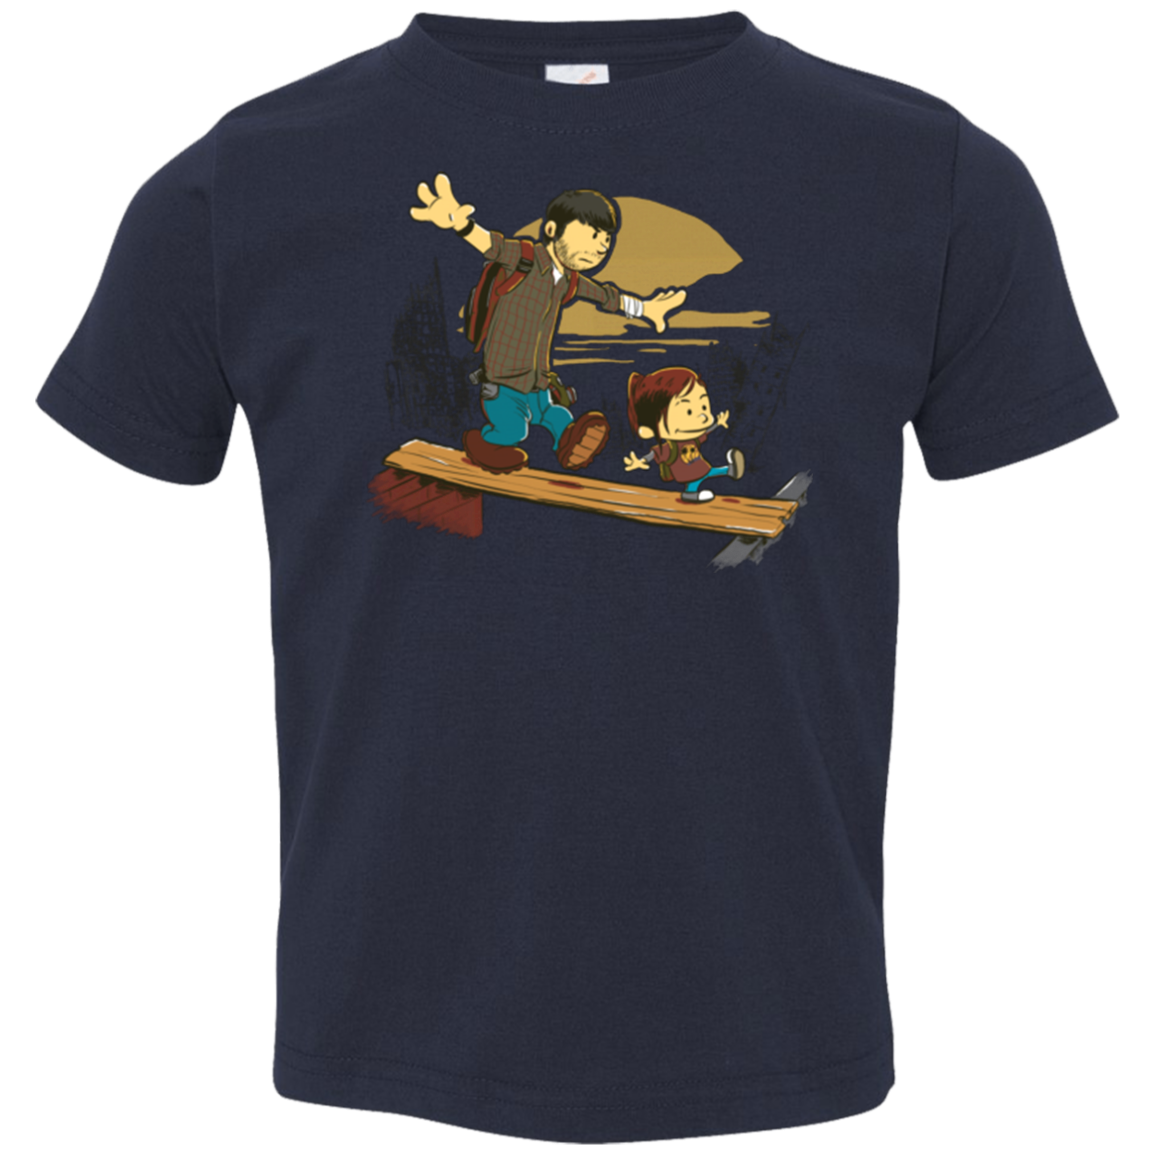 Just the 2 of Us Toddler Premium T-Shirt